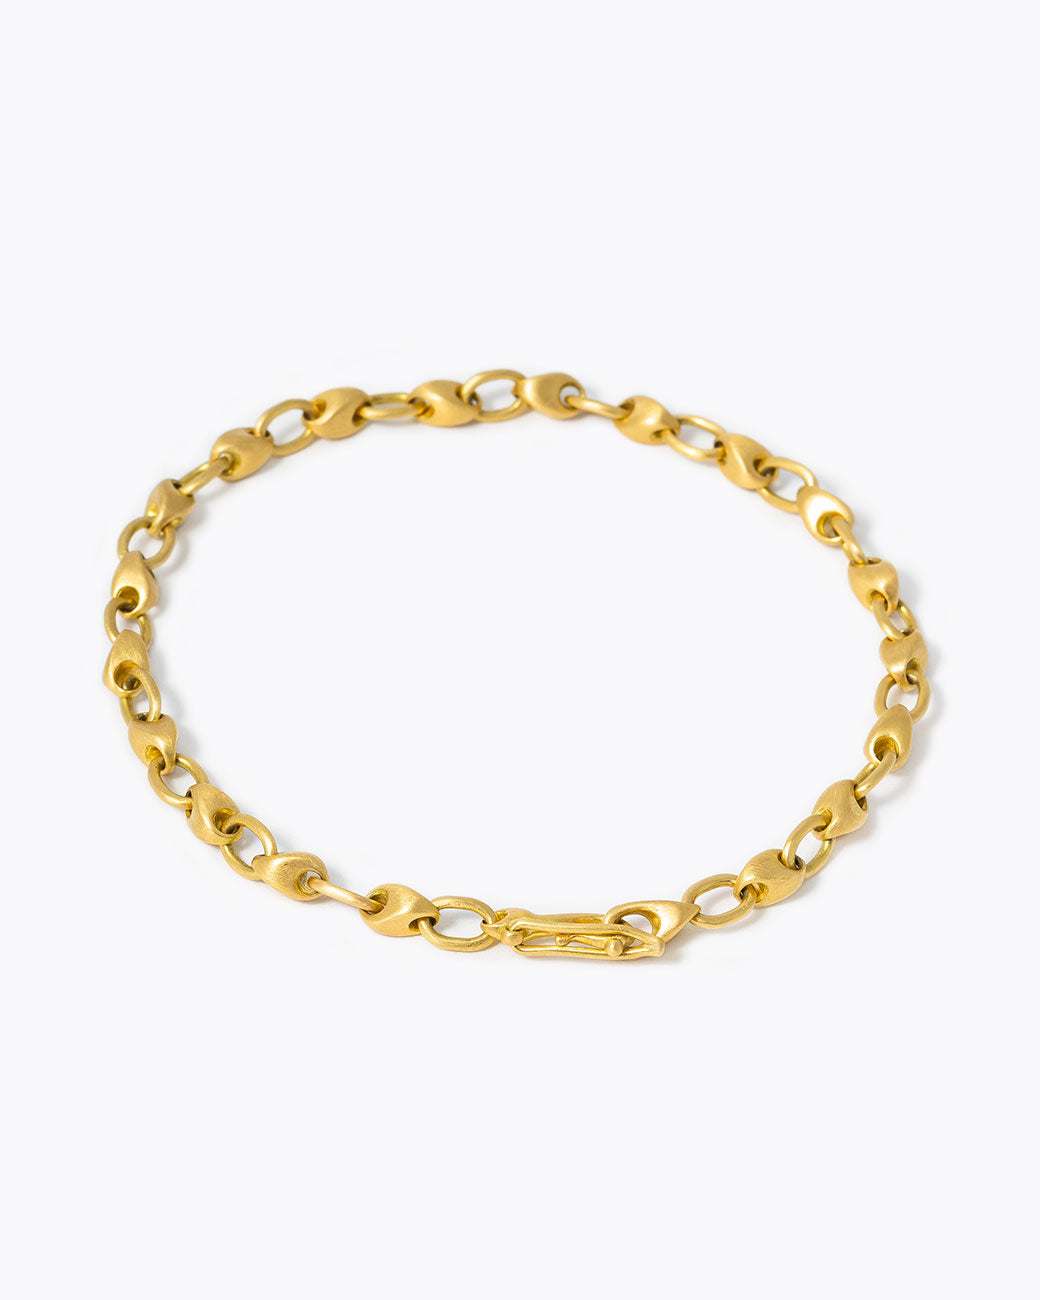 A 18k yellow gold handcrafted bracelet by Marian Maurer. The links alternate between ovals and pebble shapes.